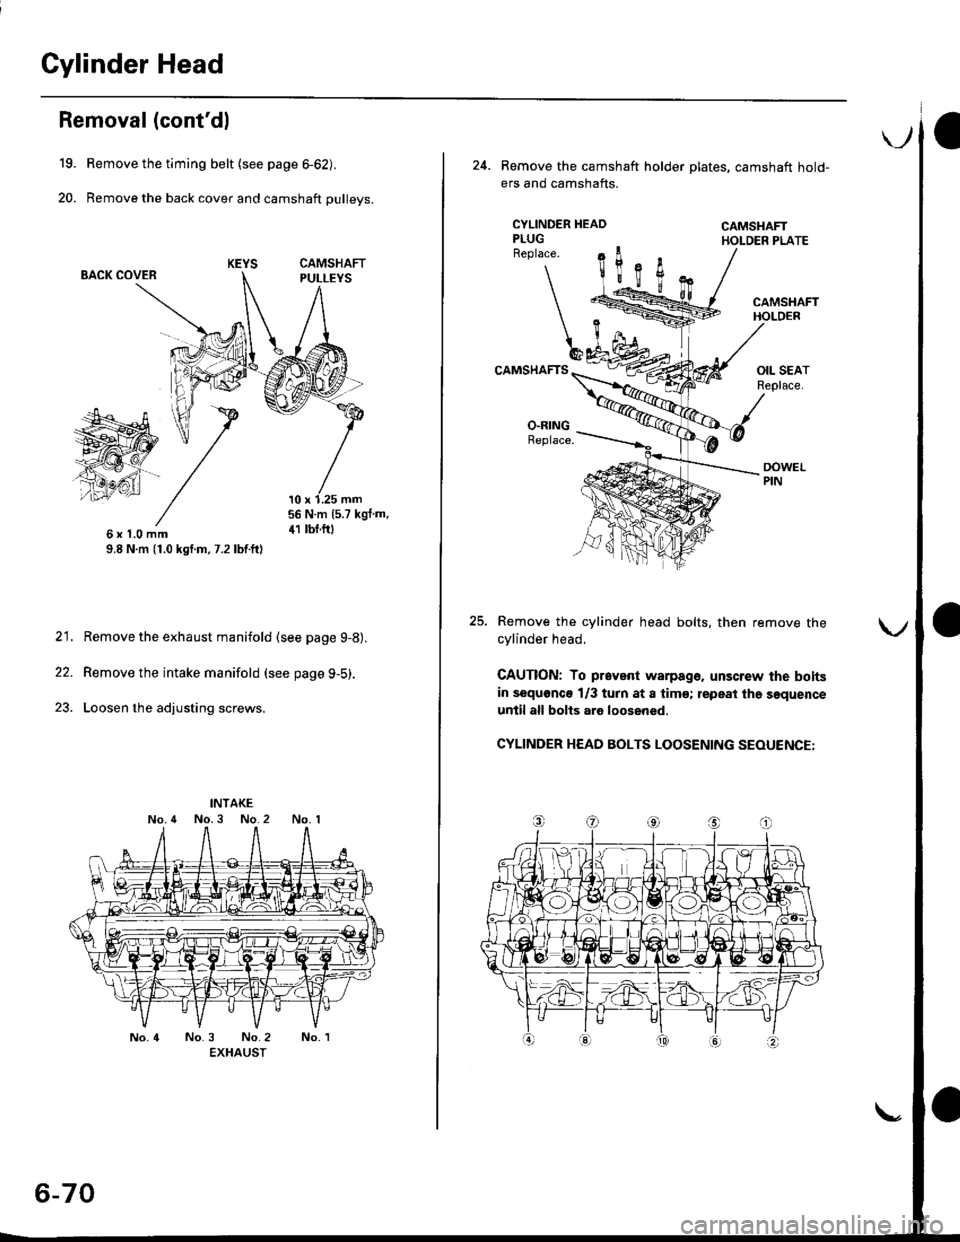 HONDA CIVIC 1996 6.G Workshop Manual Cylinder Head
19.
20.
Removal (contdl
Remove the timing belt {see page 6-62).
Remove the back cover and camshaft pulleys.
BACK COVER
56 N.m (5.7 kgf m,
41 tbt.f06xl.0mm9.8 N,m (1.0 kgf.m, 7.2 lbf.ft)